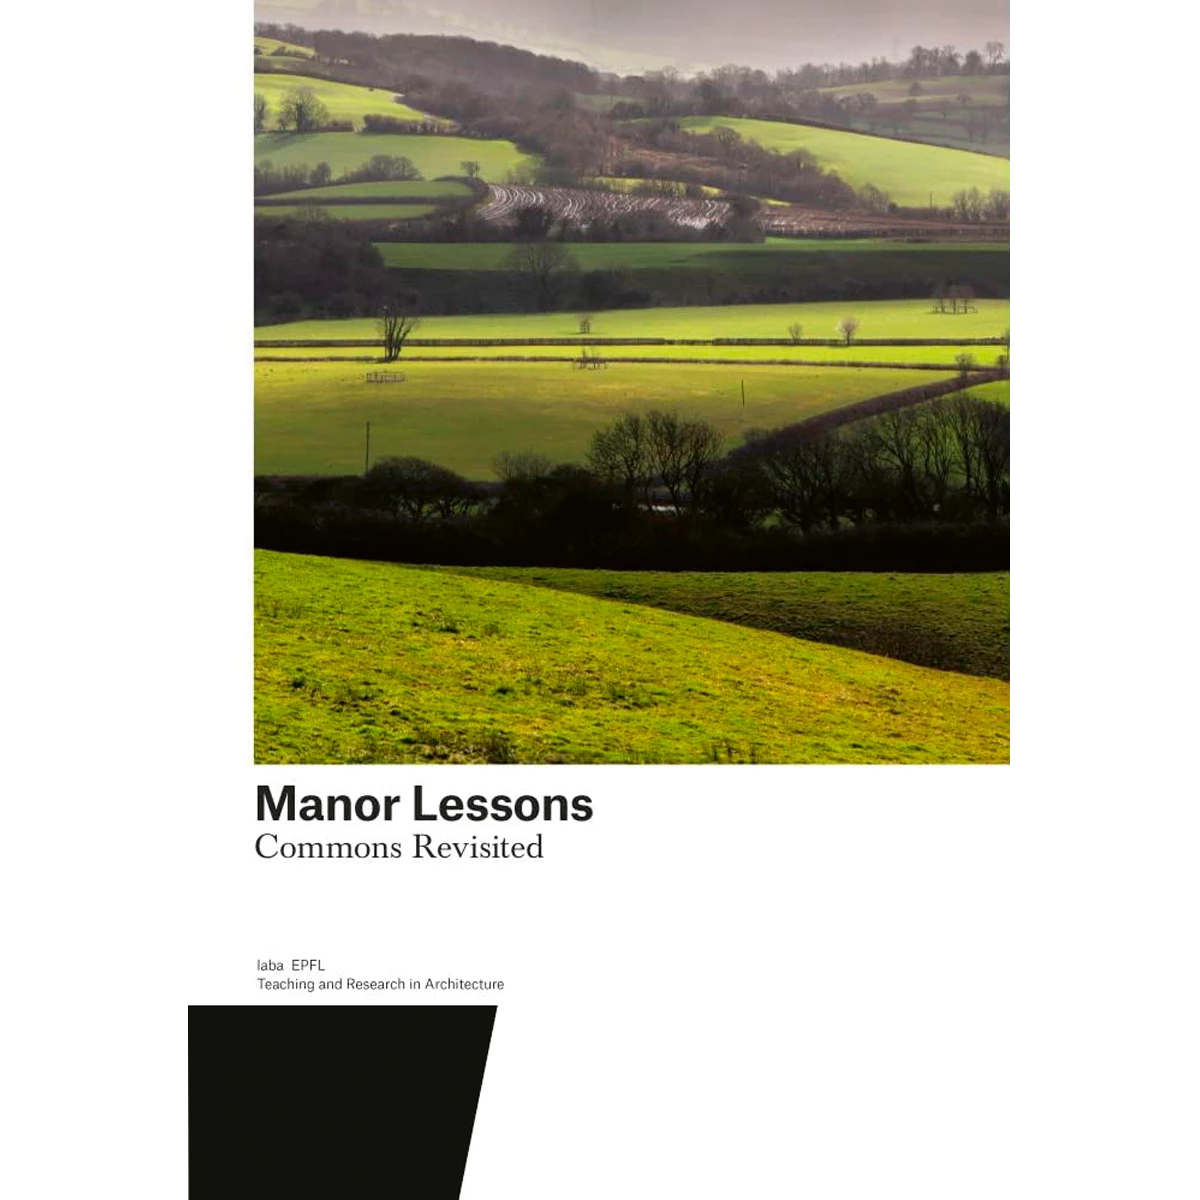 Manor Lessons